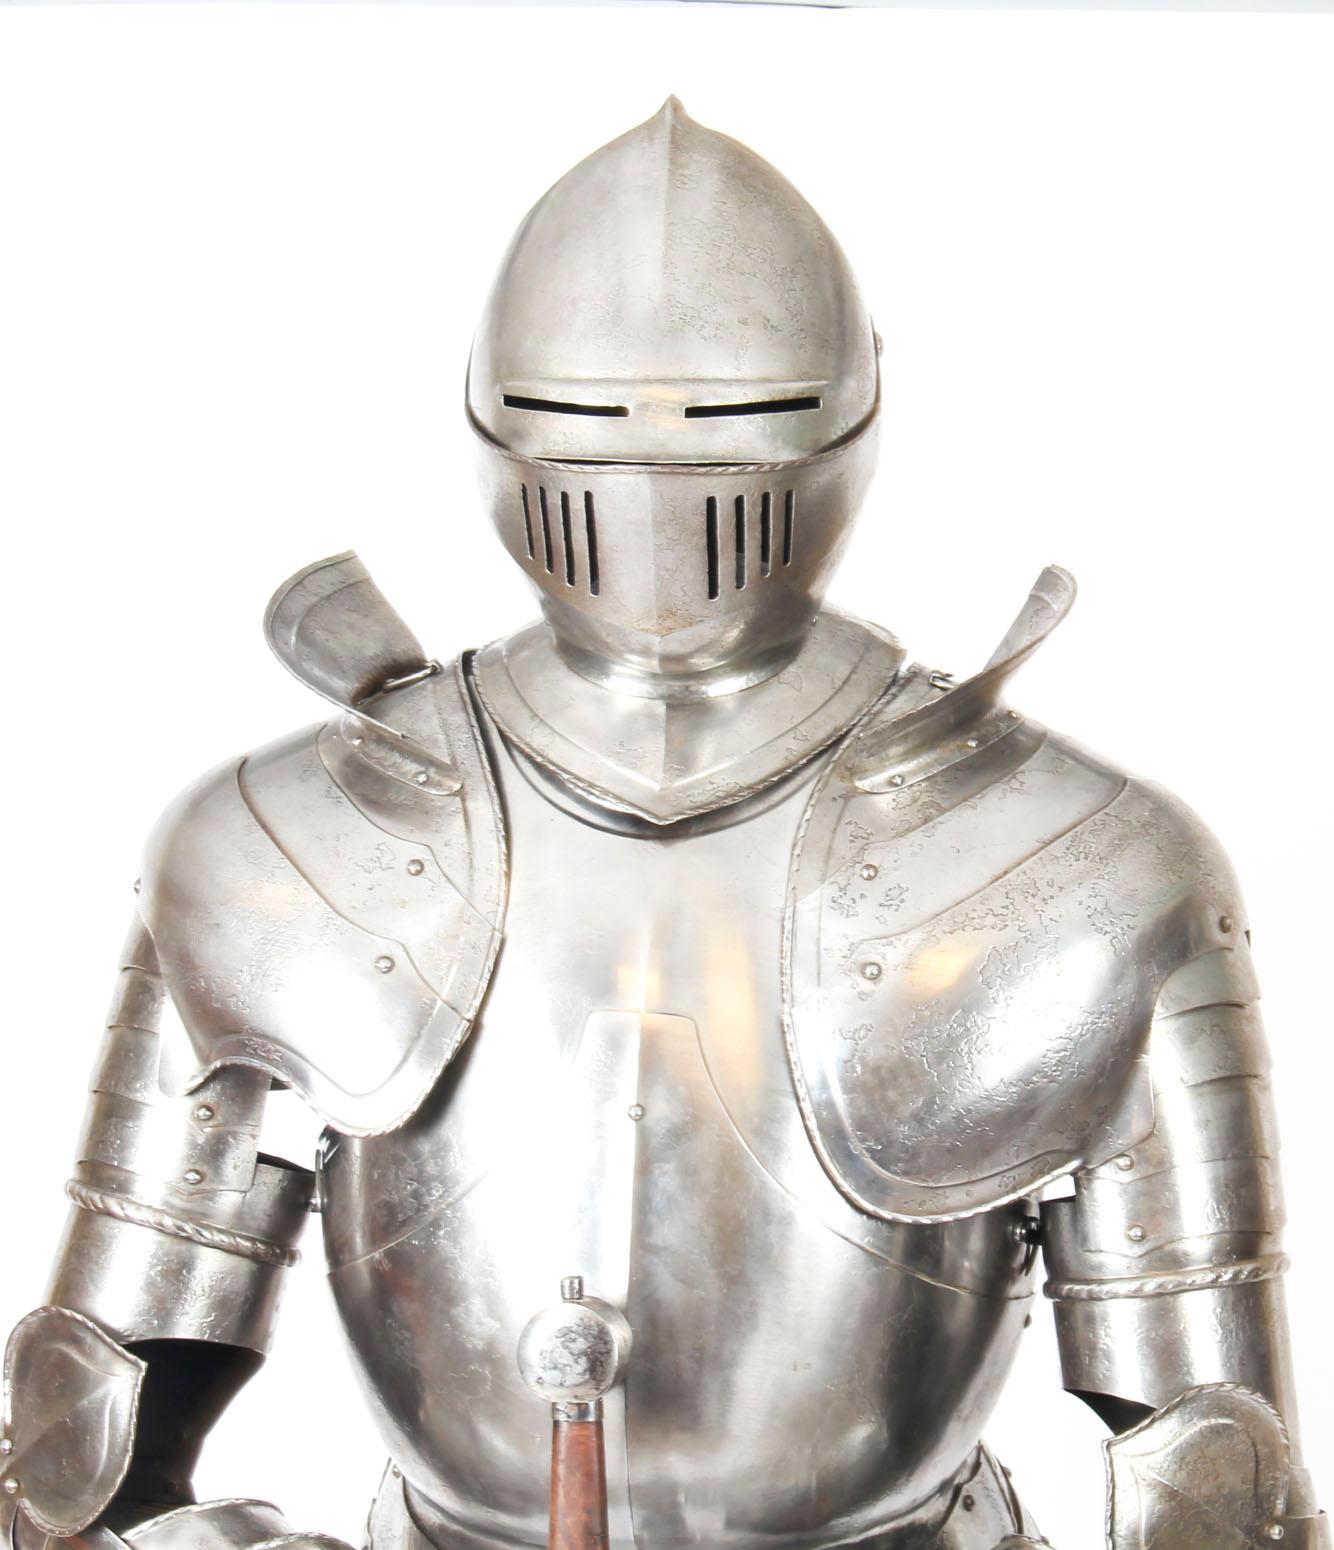 This is a fabulous antique handcrafted complete suit of life-size Greenwich style Tudor Knight plate armour dating from the early 20th century.

The finely cast fully articulated suit is mounted on a wooden Stand with an upholstered mannequin and